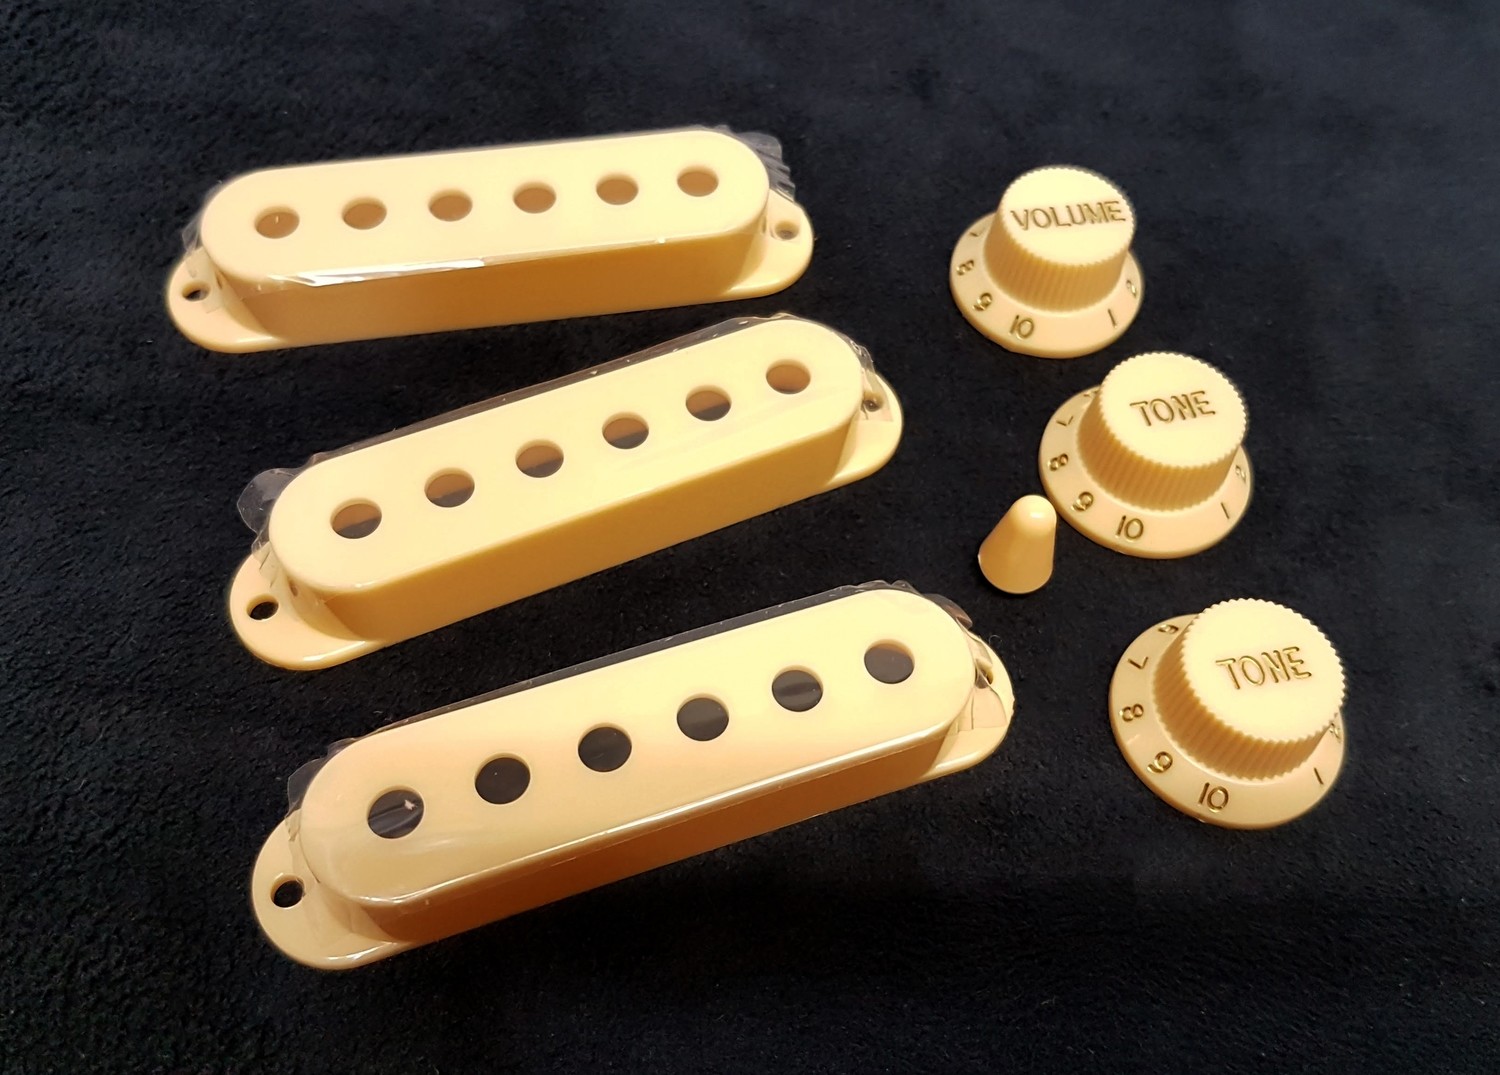 Pickup covers + 2T1V knobs + 5-Way switch tip Cream